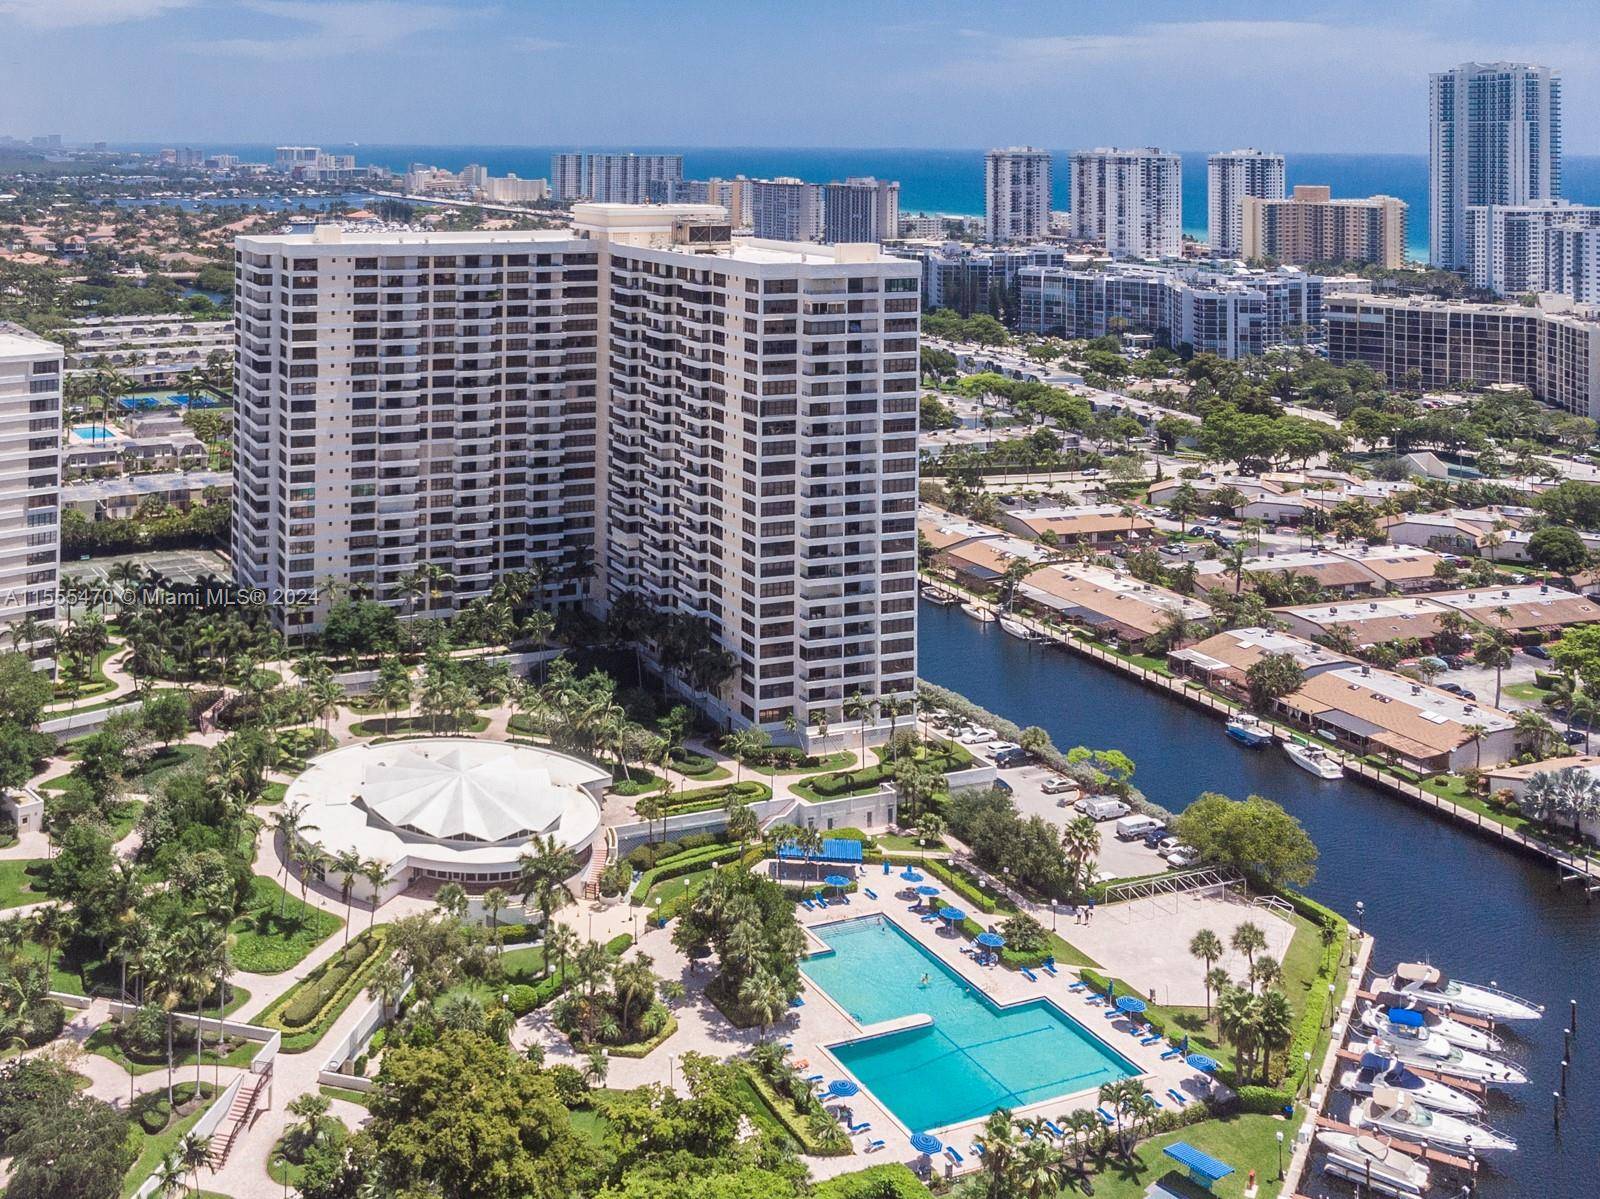 LUXURY WATERFRONT CONDO WITH DIRECT VIEWS OF THE MARINA, INTRACOASTAL POOL.